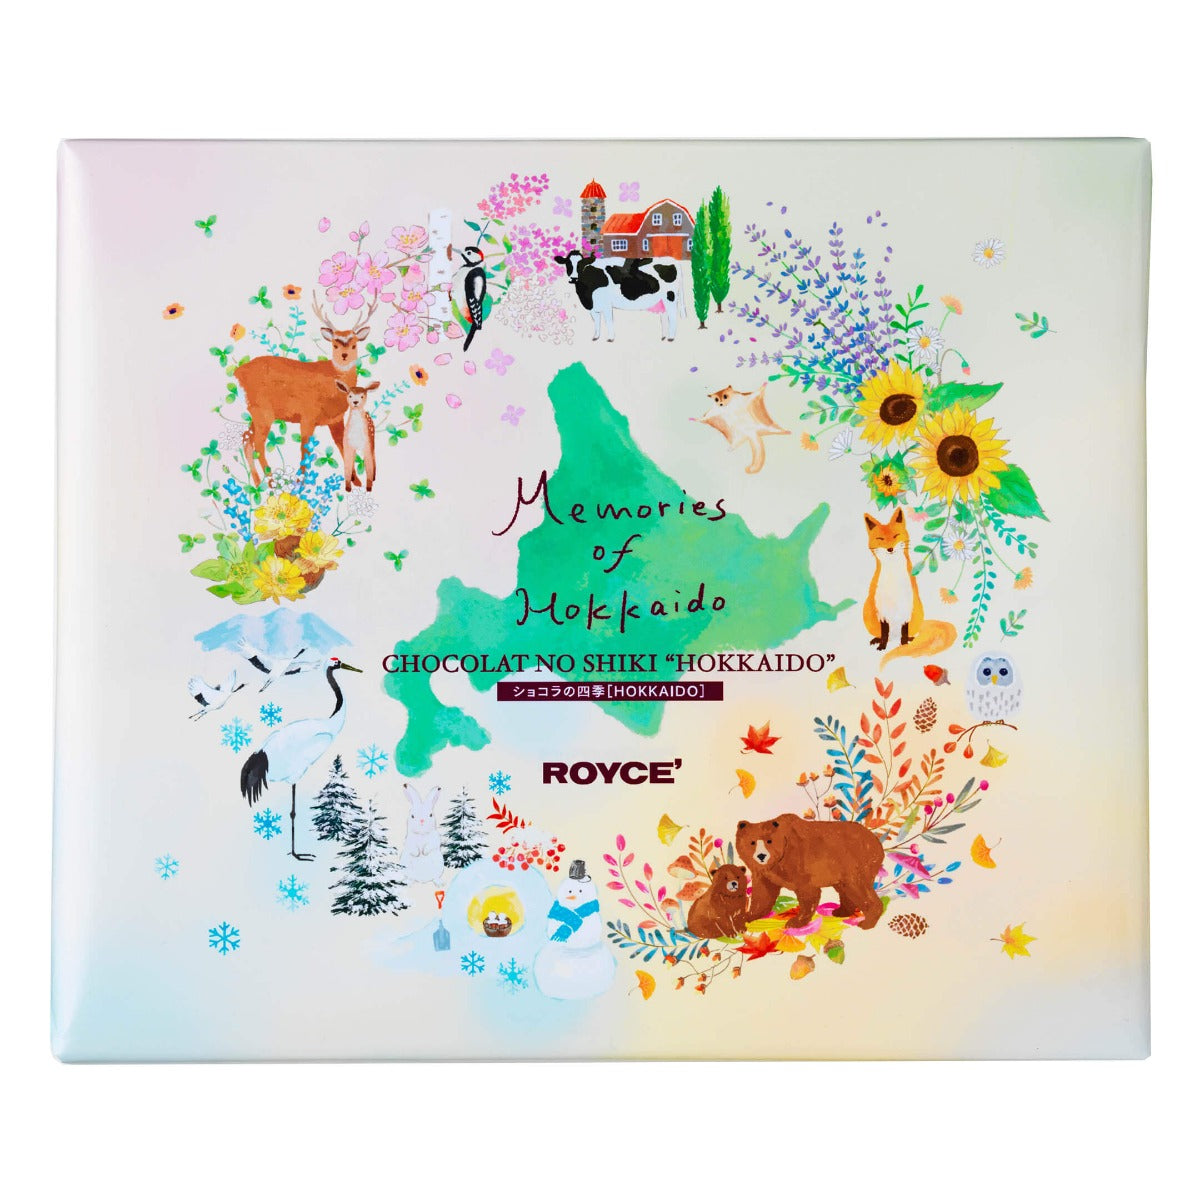 ROYCE' Chocolate - Chocolat No Shiki "Hokkaido" - Image shows a printed yellow box with illustrations of deer, birds, bears, a cow, a snowman, a fox, flowers, leaves, trees, and snowflakes. Colors seen are a mix of brown, green, white, yellow, and blue. Text in the middle says Memories of Hokkaido. Chocolat No Shiki "Hokkaido". ROYCE'. Background is in white.